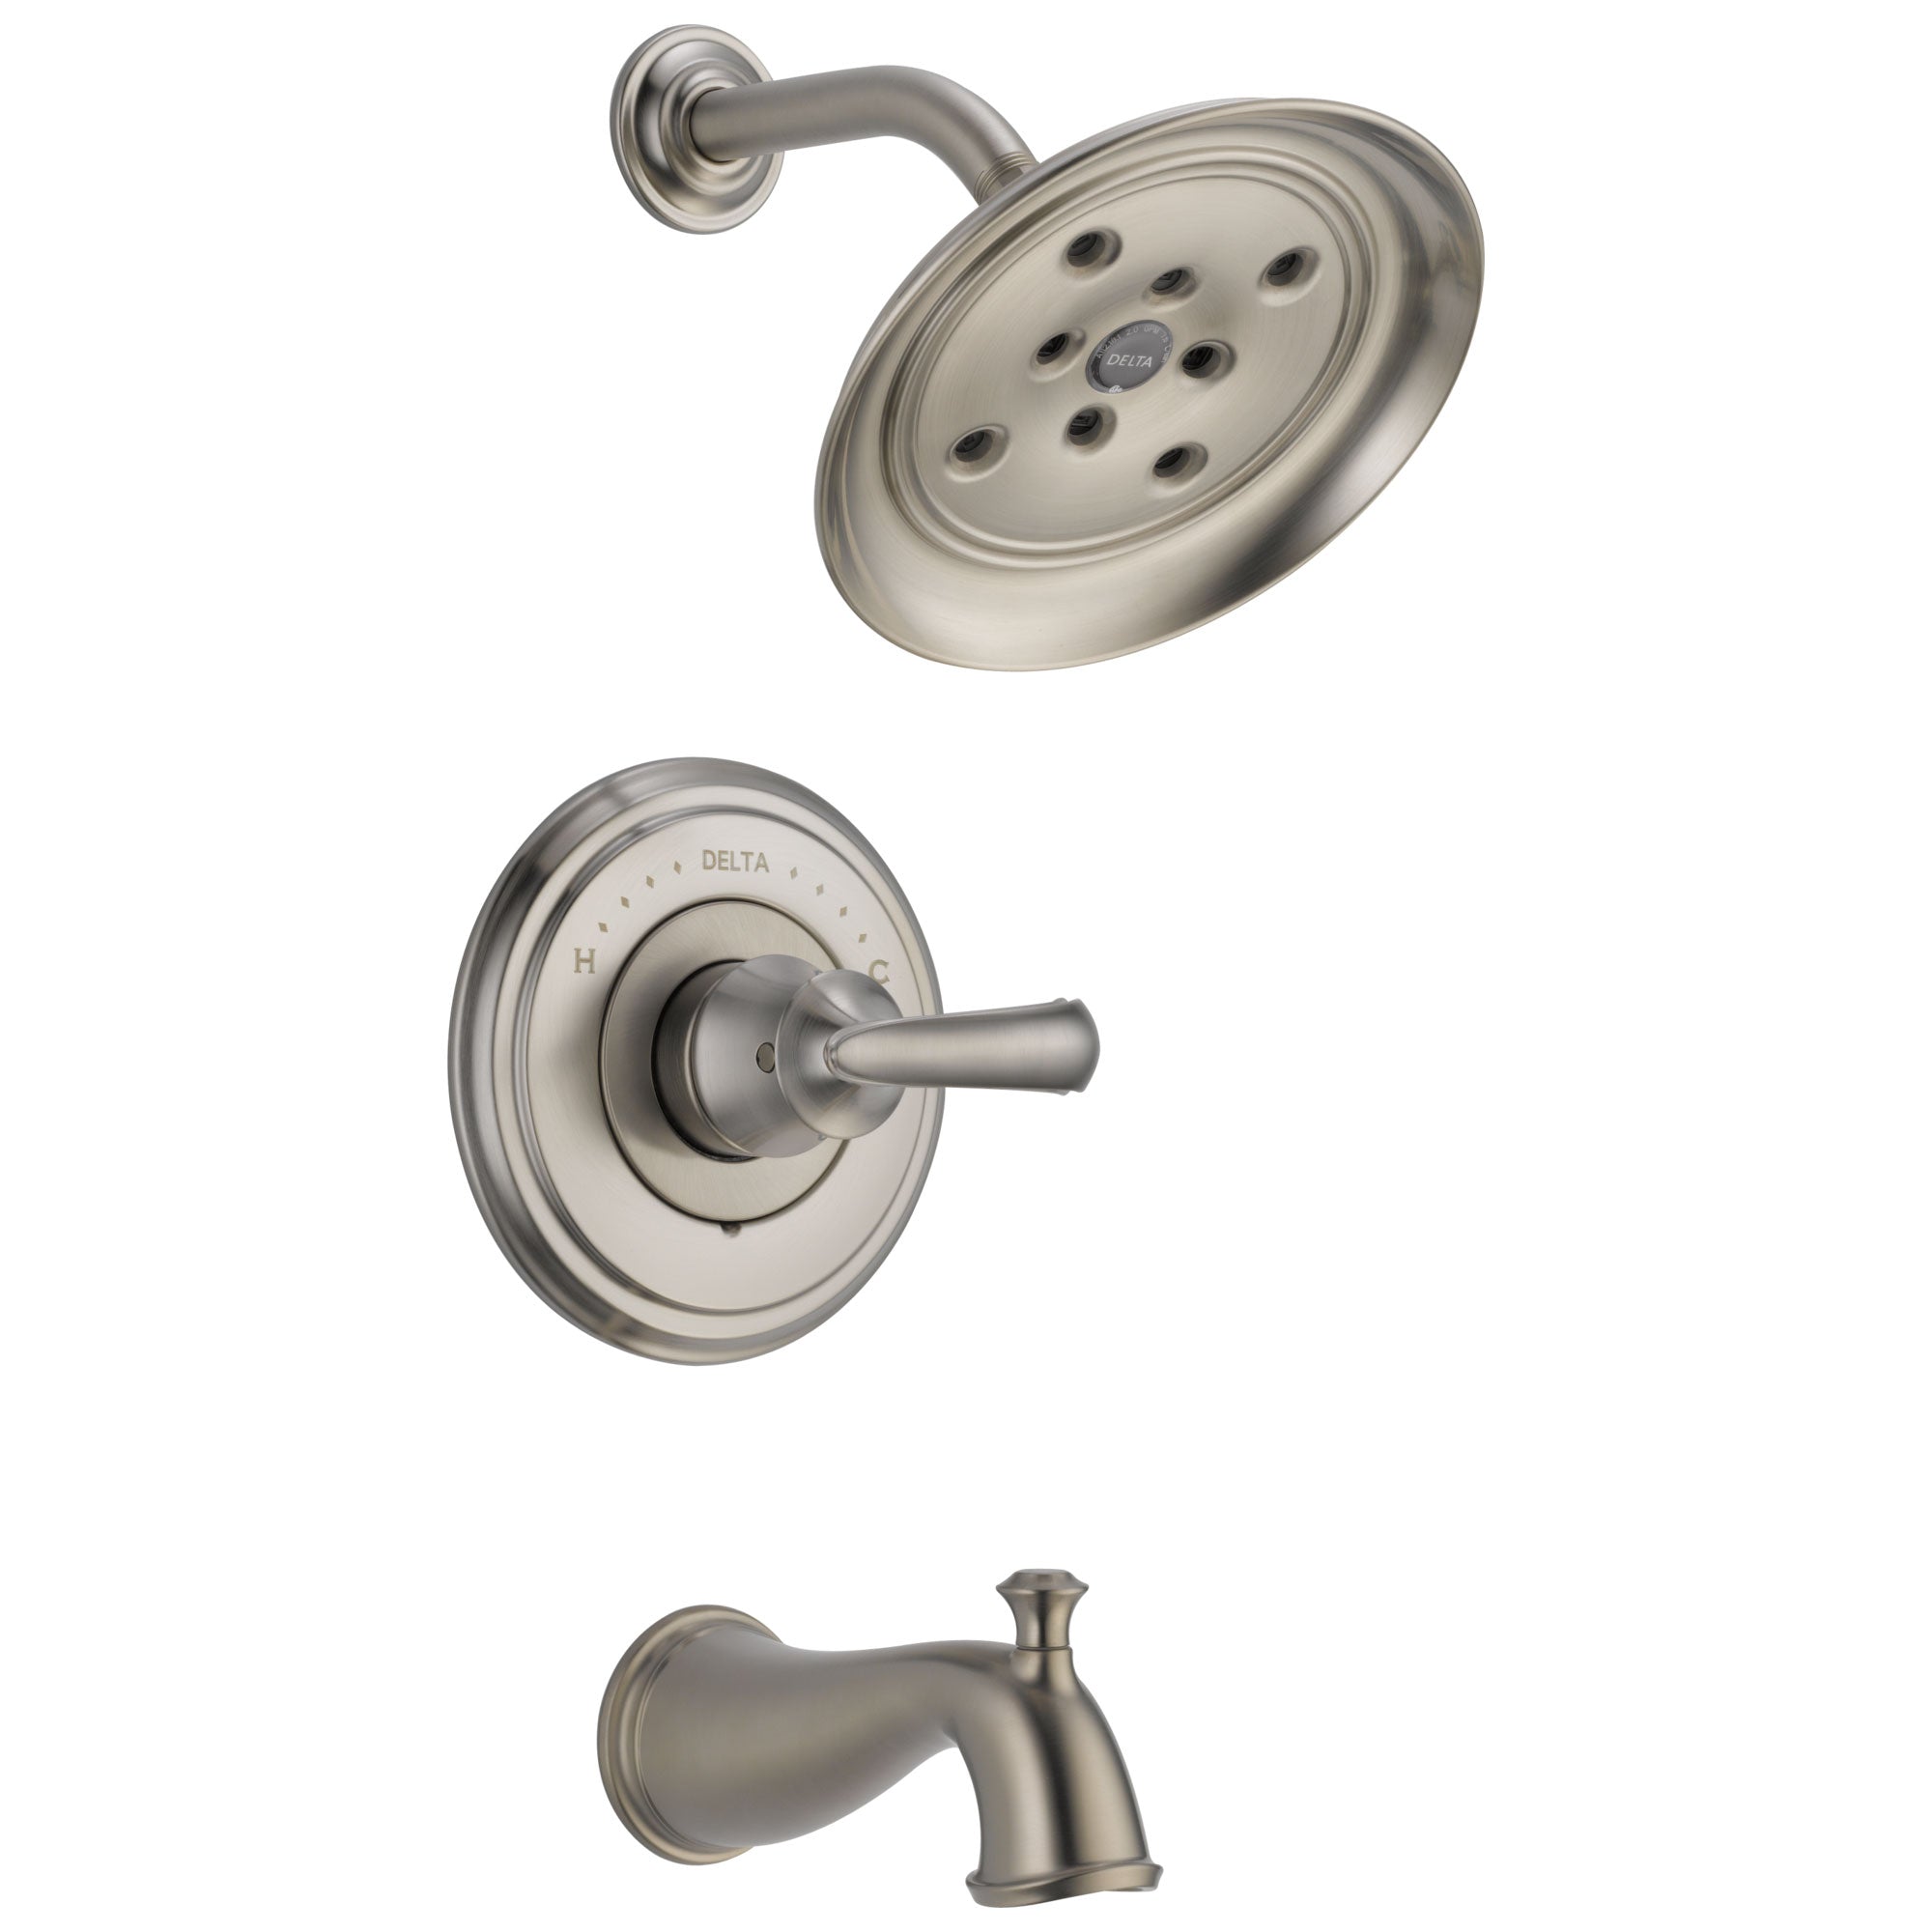 Delta Cassidy Collection Stainless Steel Finish Monitor 14 Tub and Shower Faucet Combo INCLUDES Single Scroll Lever Handle and Rough-Valve without Stops D1466V